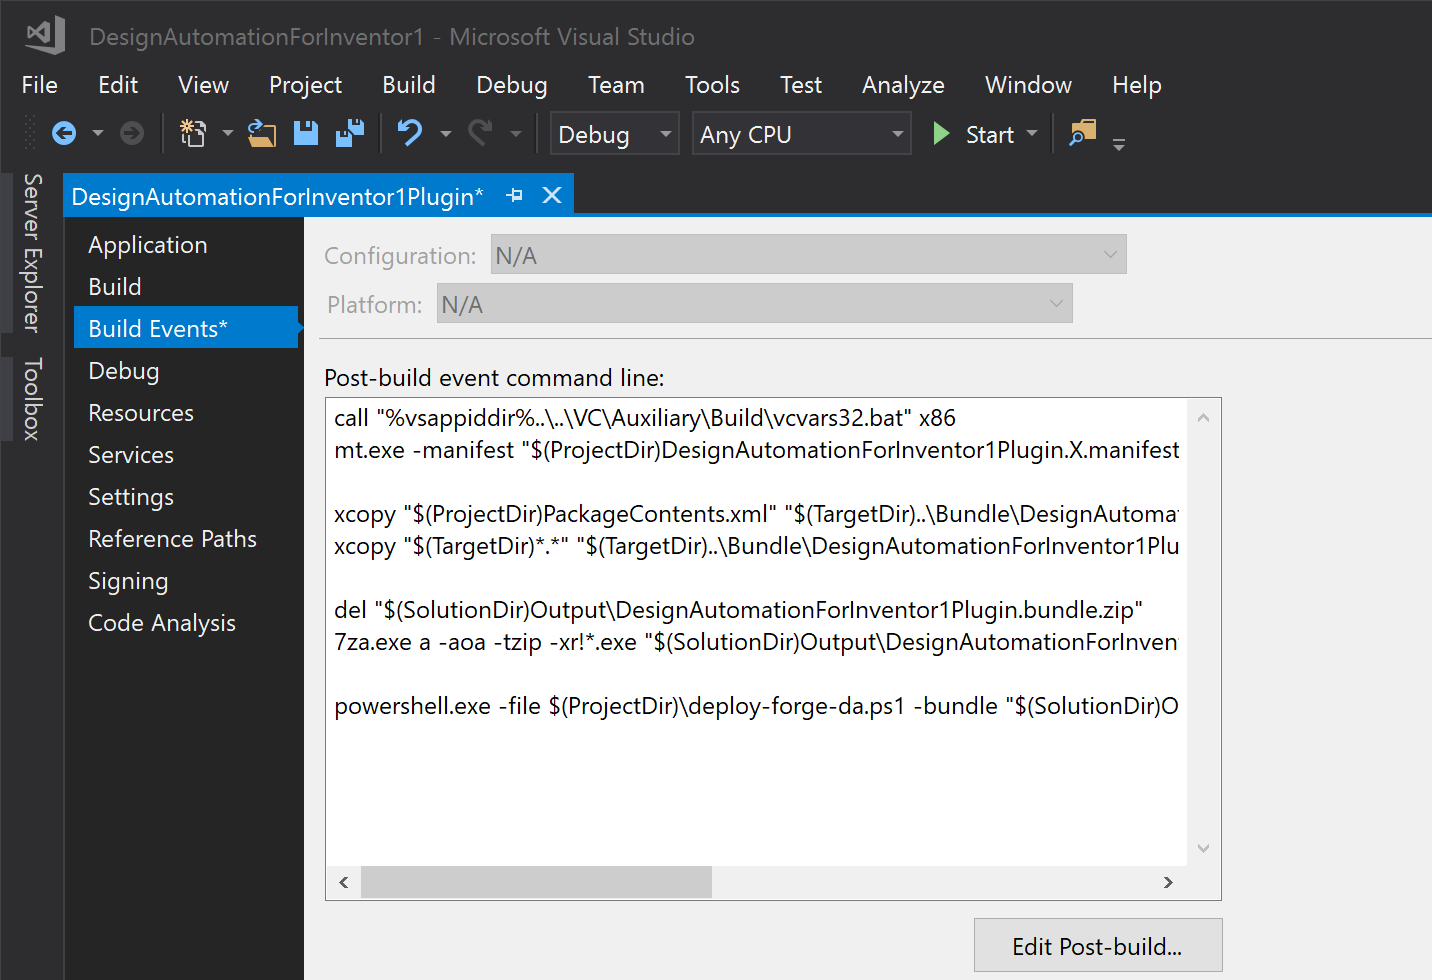 Deploying to Design Automation from Visual Studio